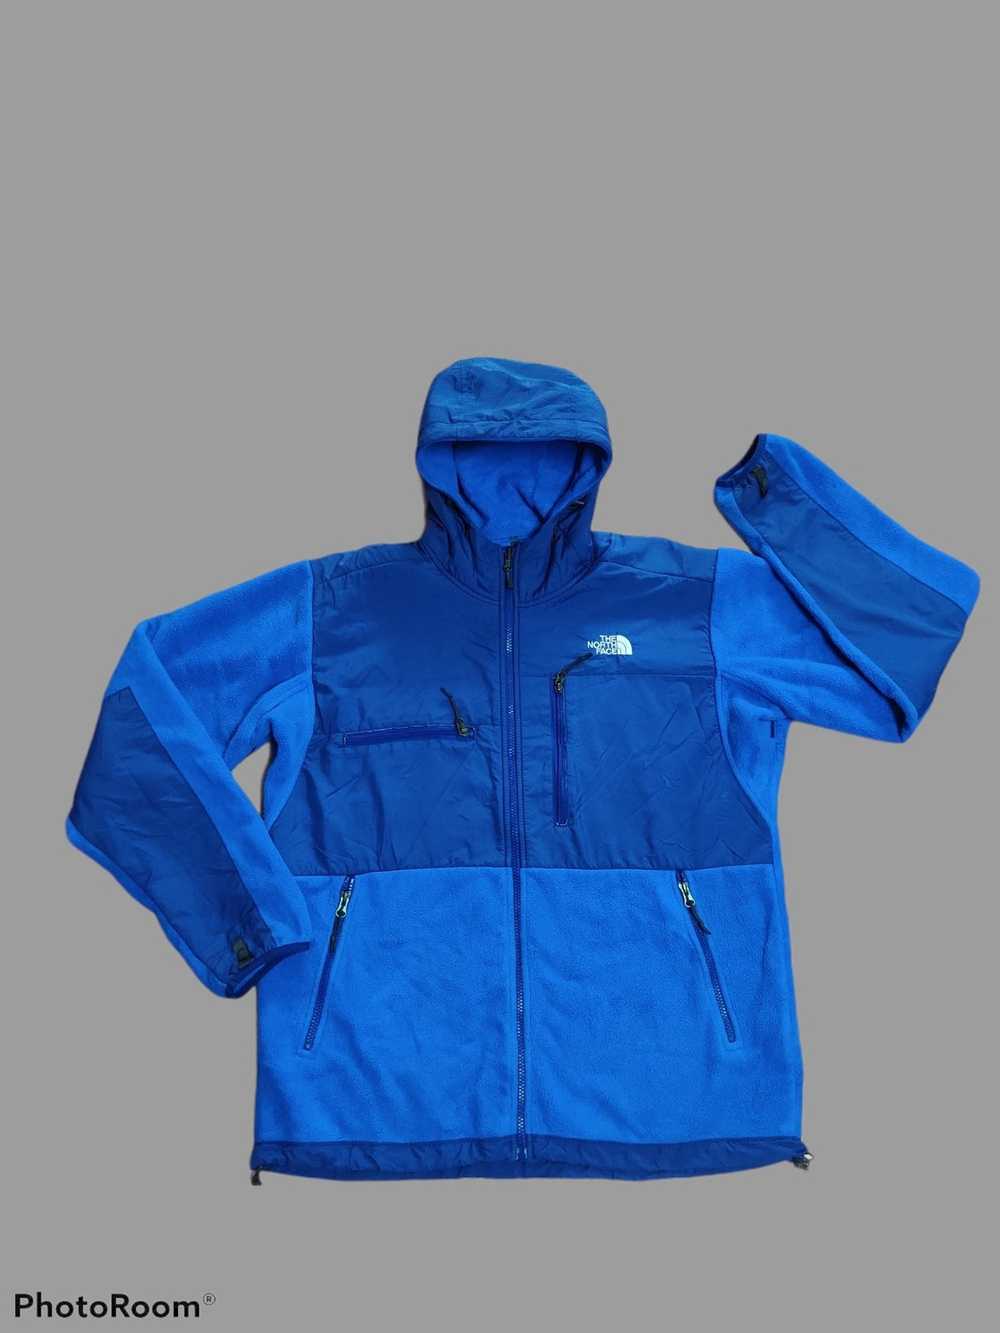 The North Face The north face denali fleece jacket - image 1